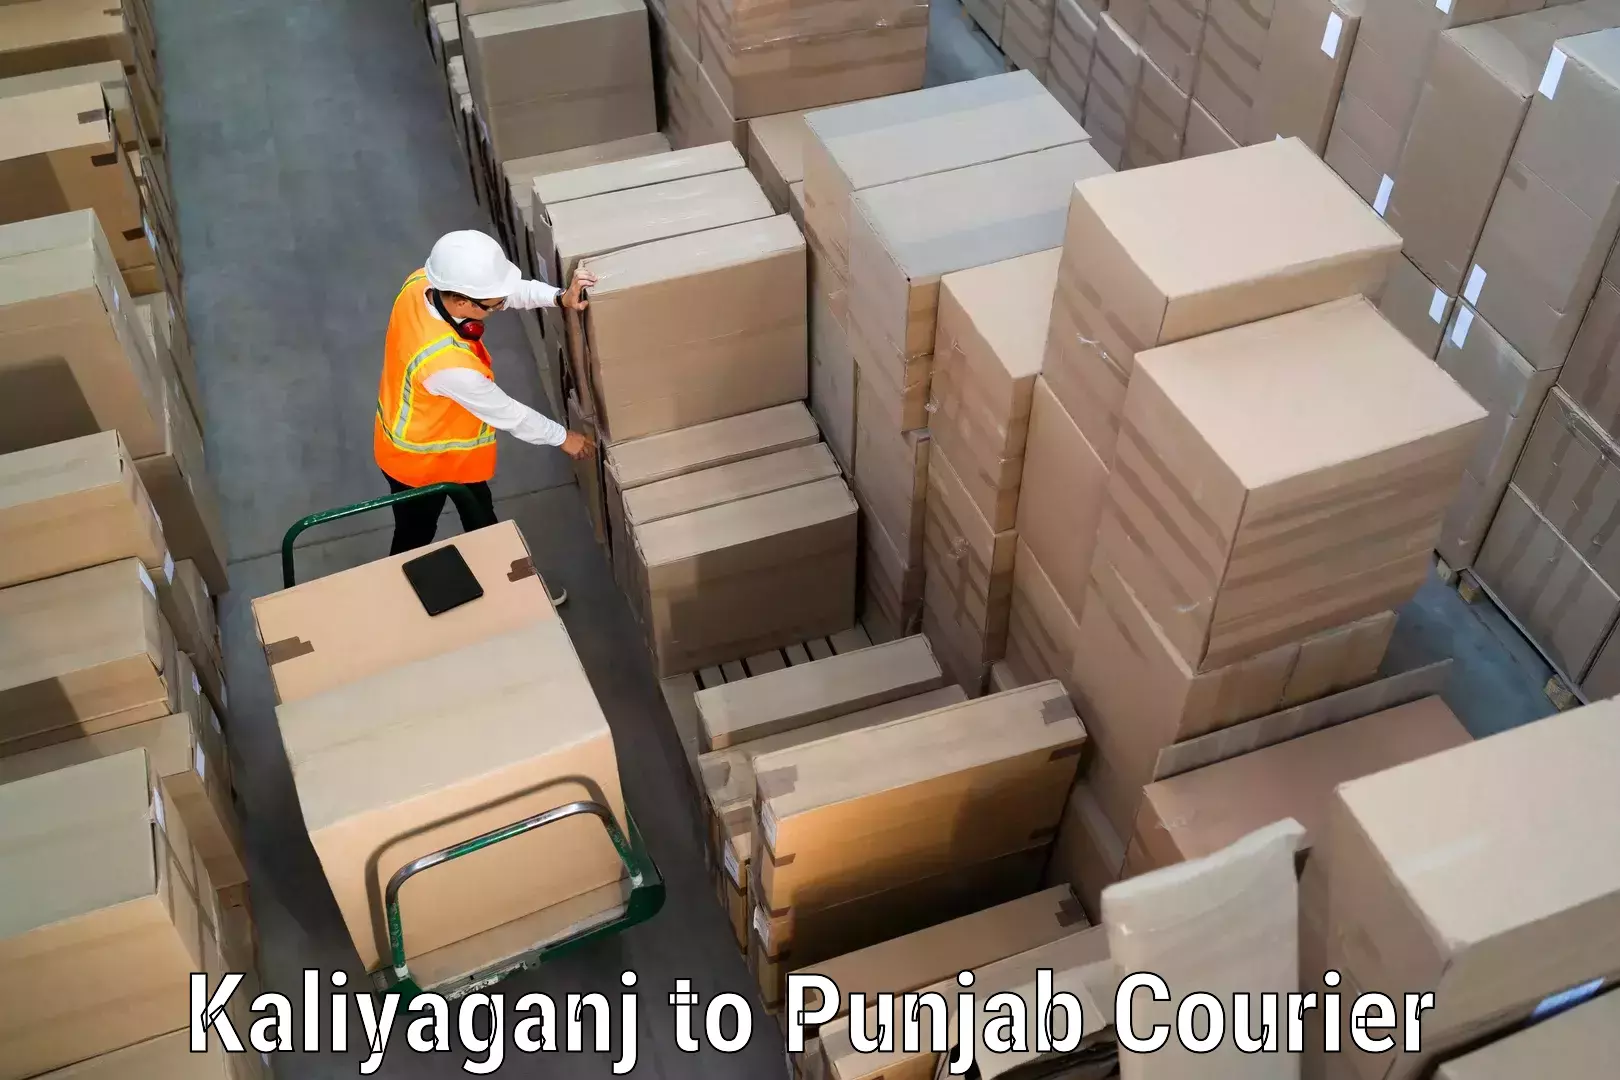 Multi-national courier services Kaliyaganj to Sultanpur Lodhi